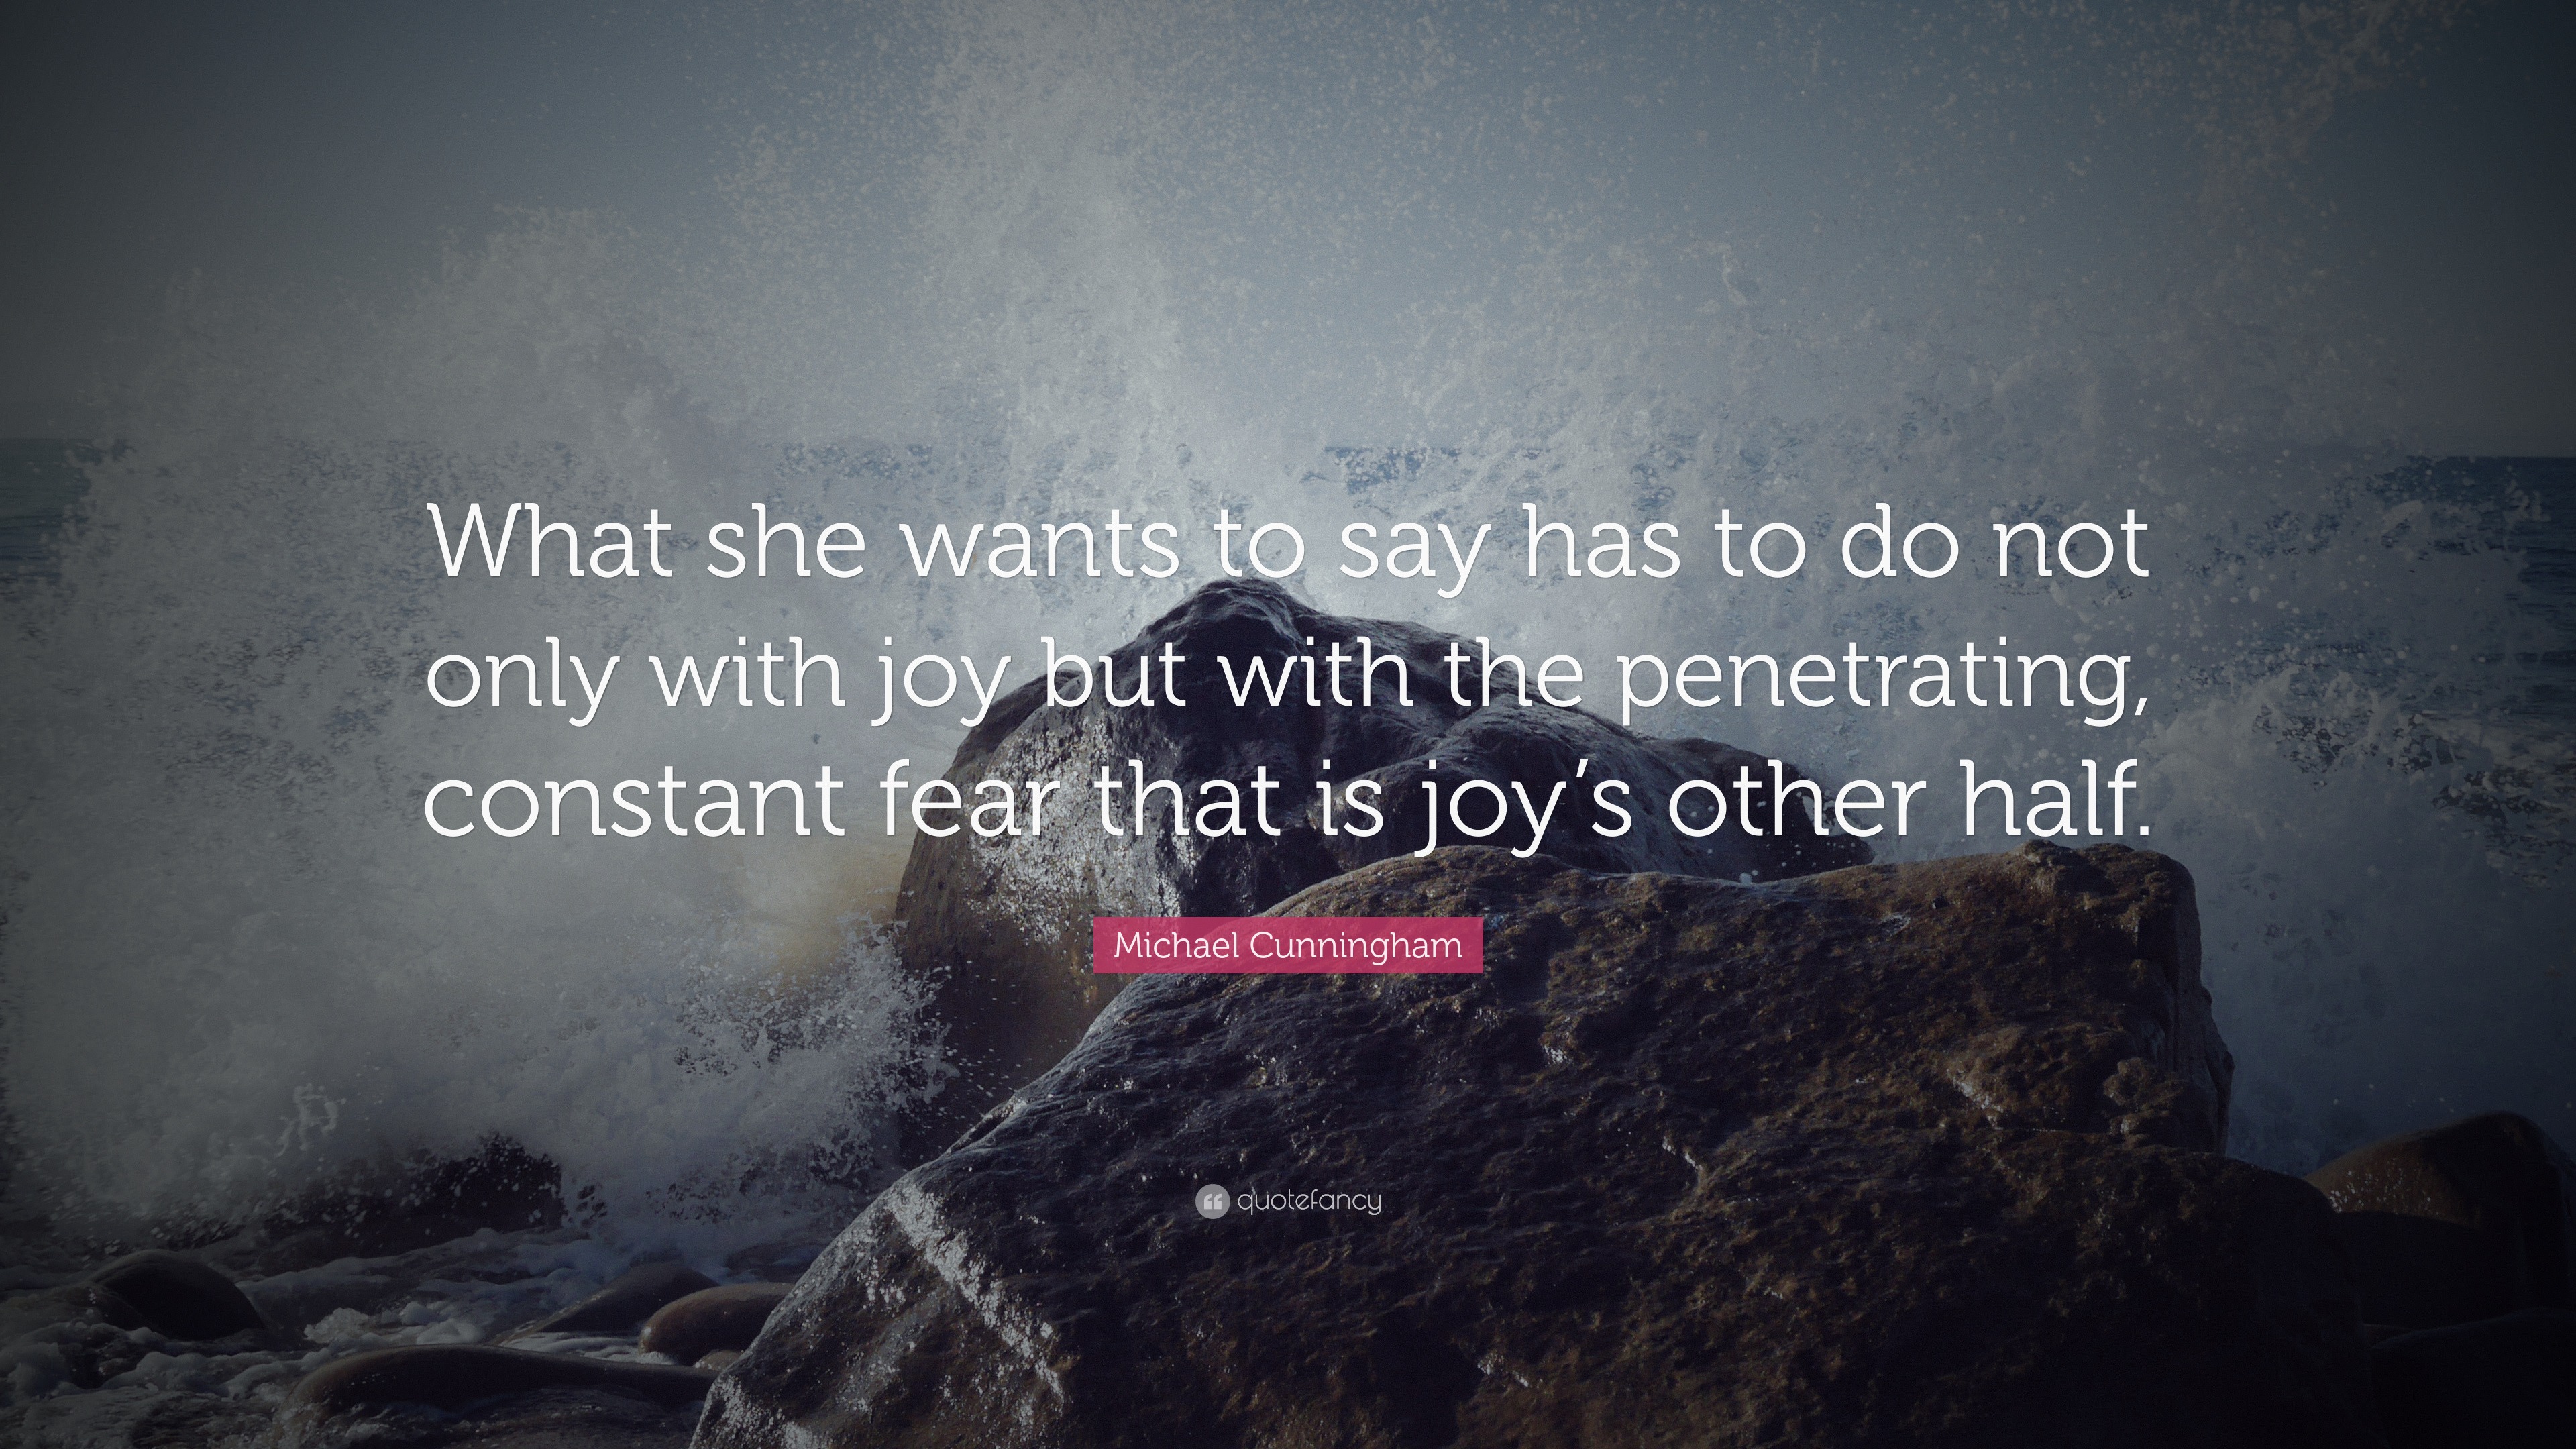 Michael Cunningham Quote: “What she wants to say has to do not only ...